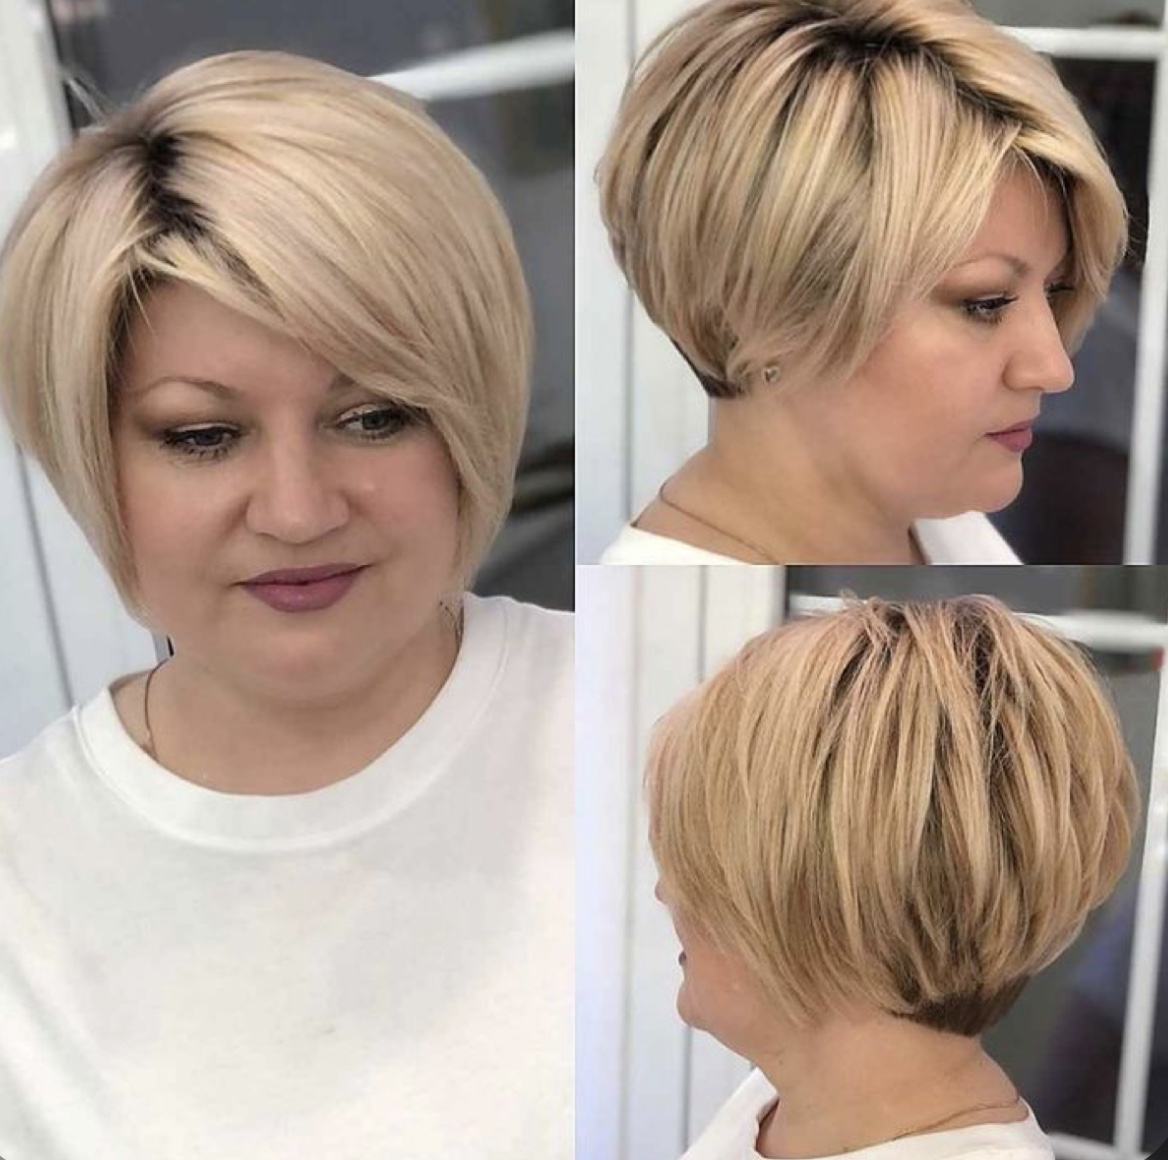 Best Short Hair For Fat Faces